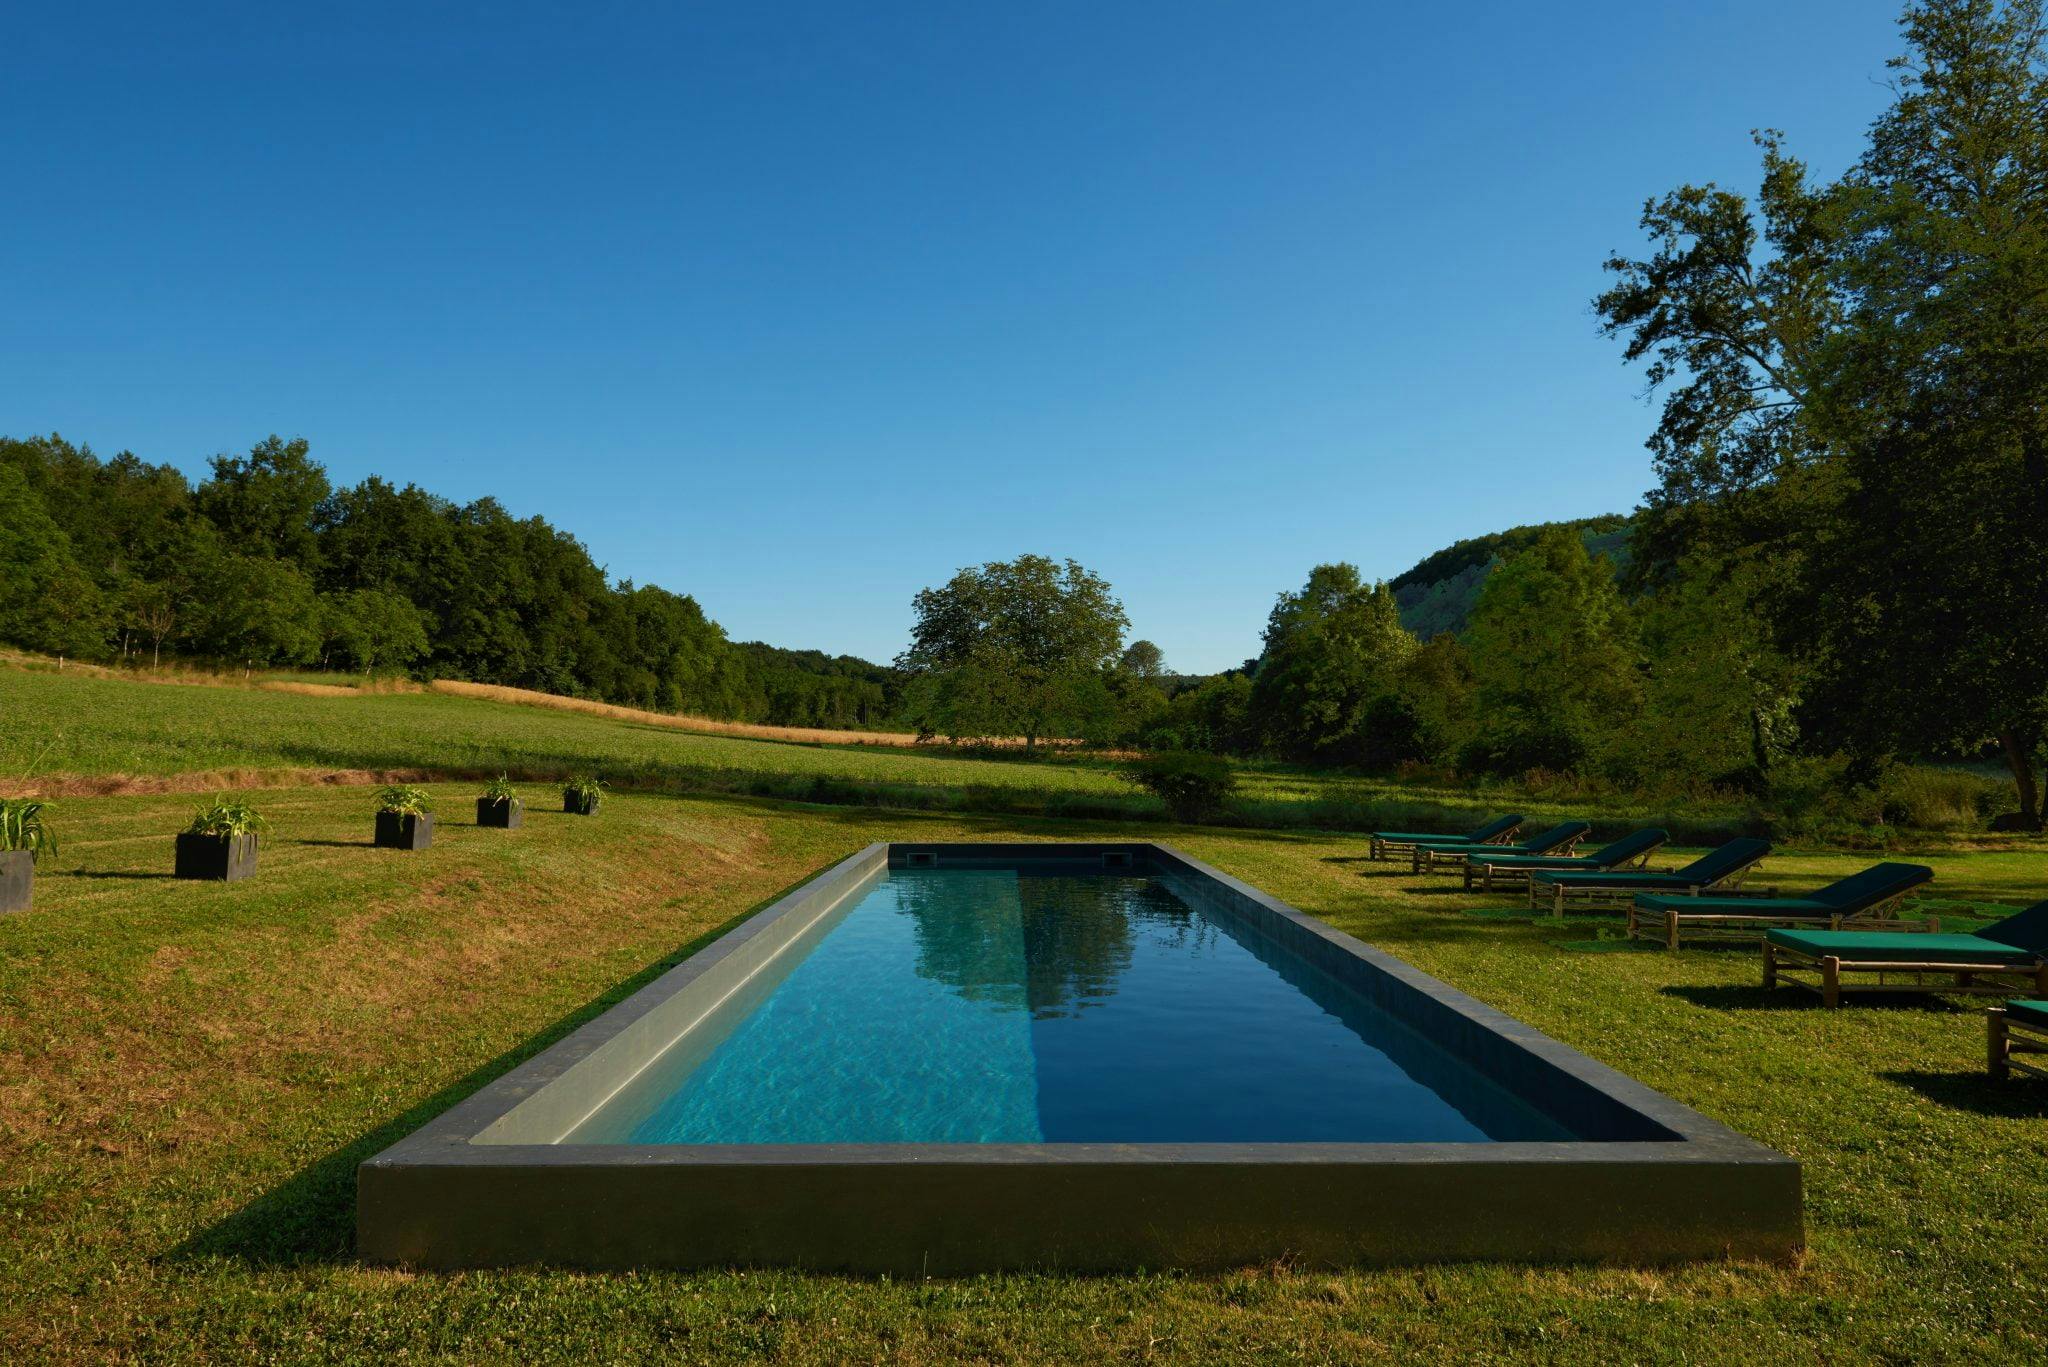 Magnificent view of the pool and surrounding fields